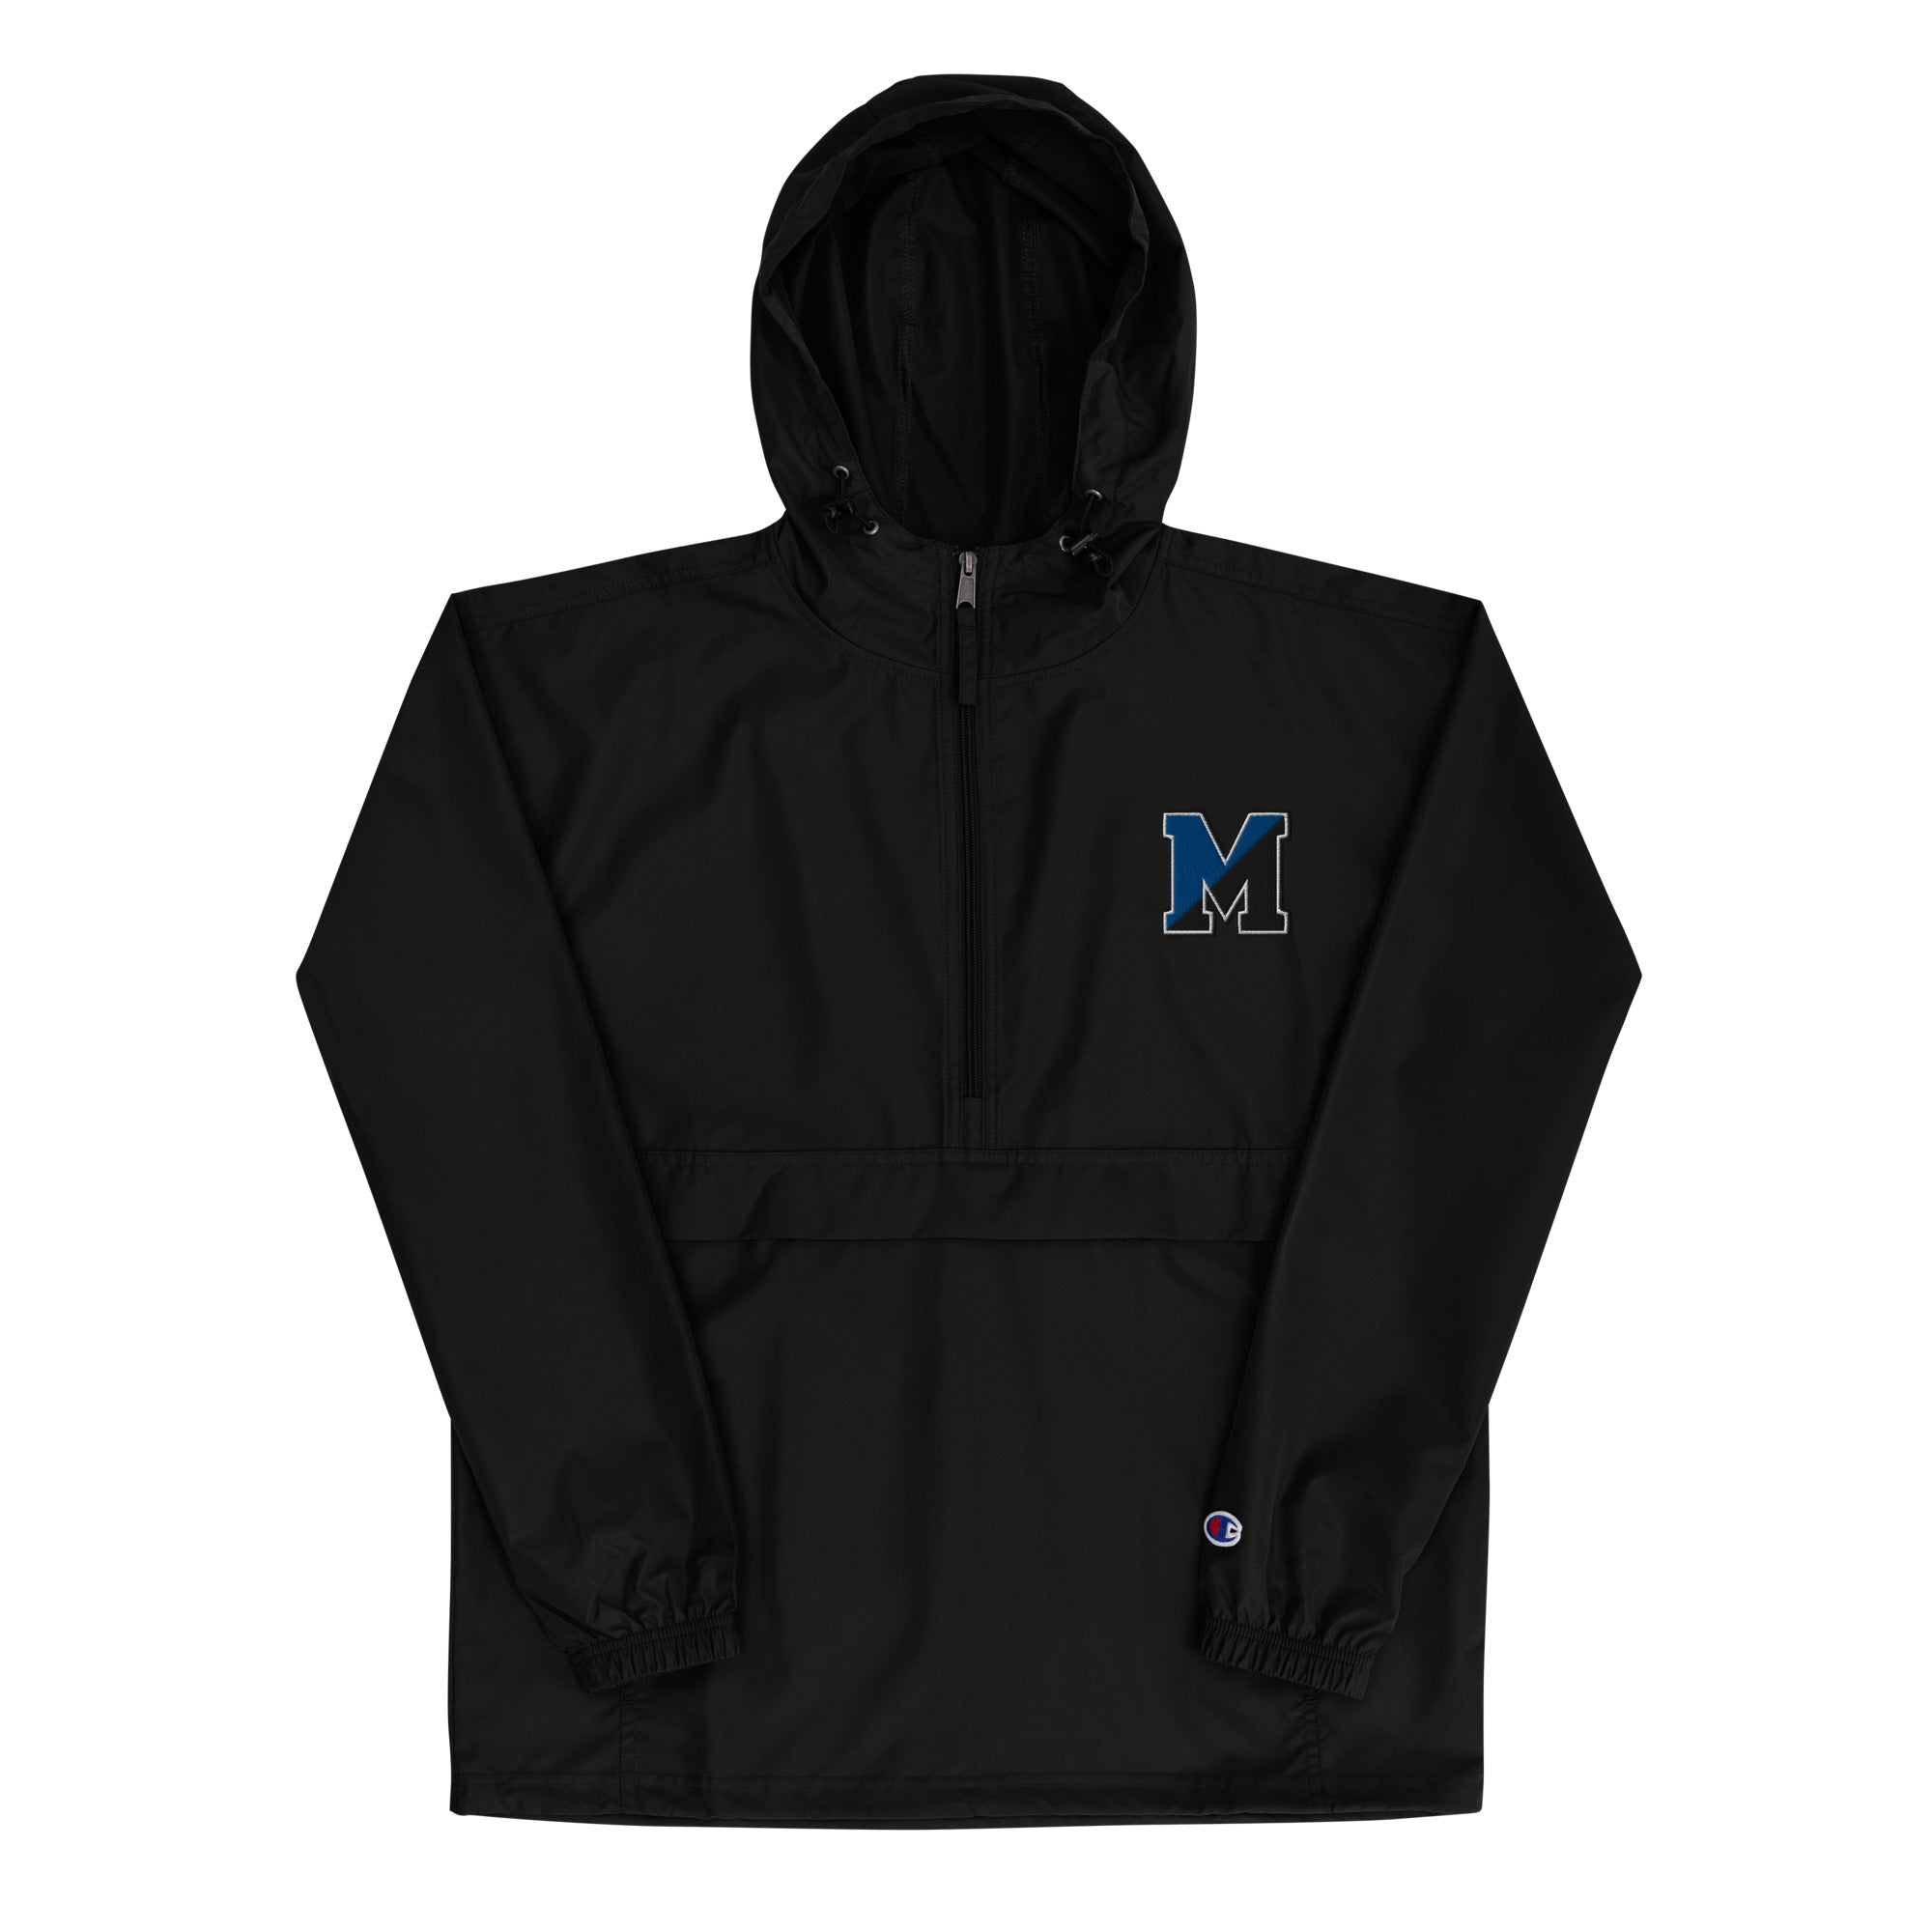 MB Embroidered Champion Packable Jacket